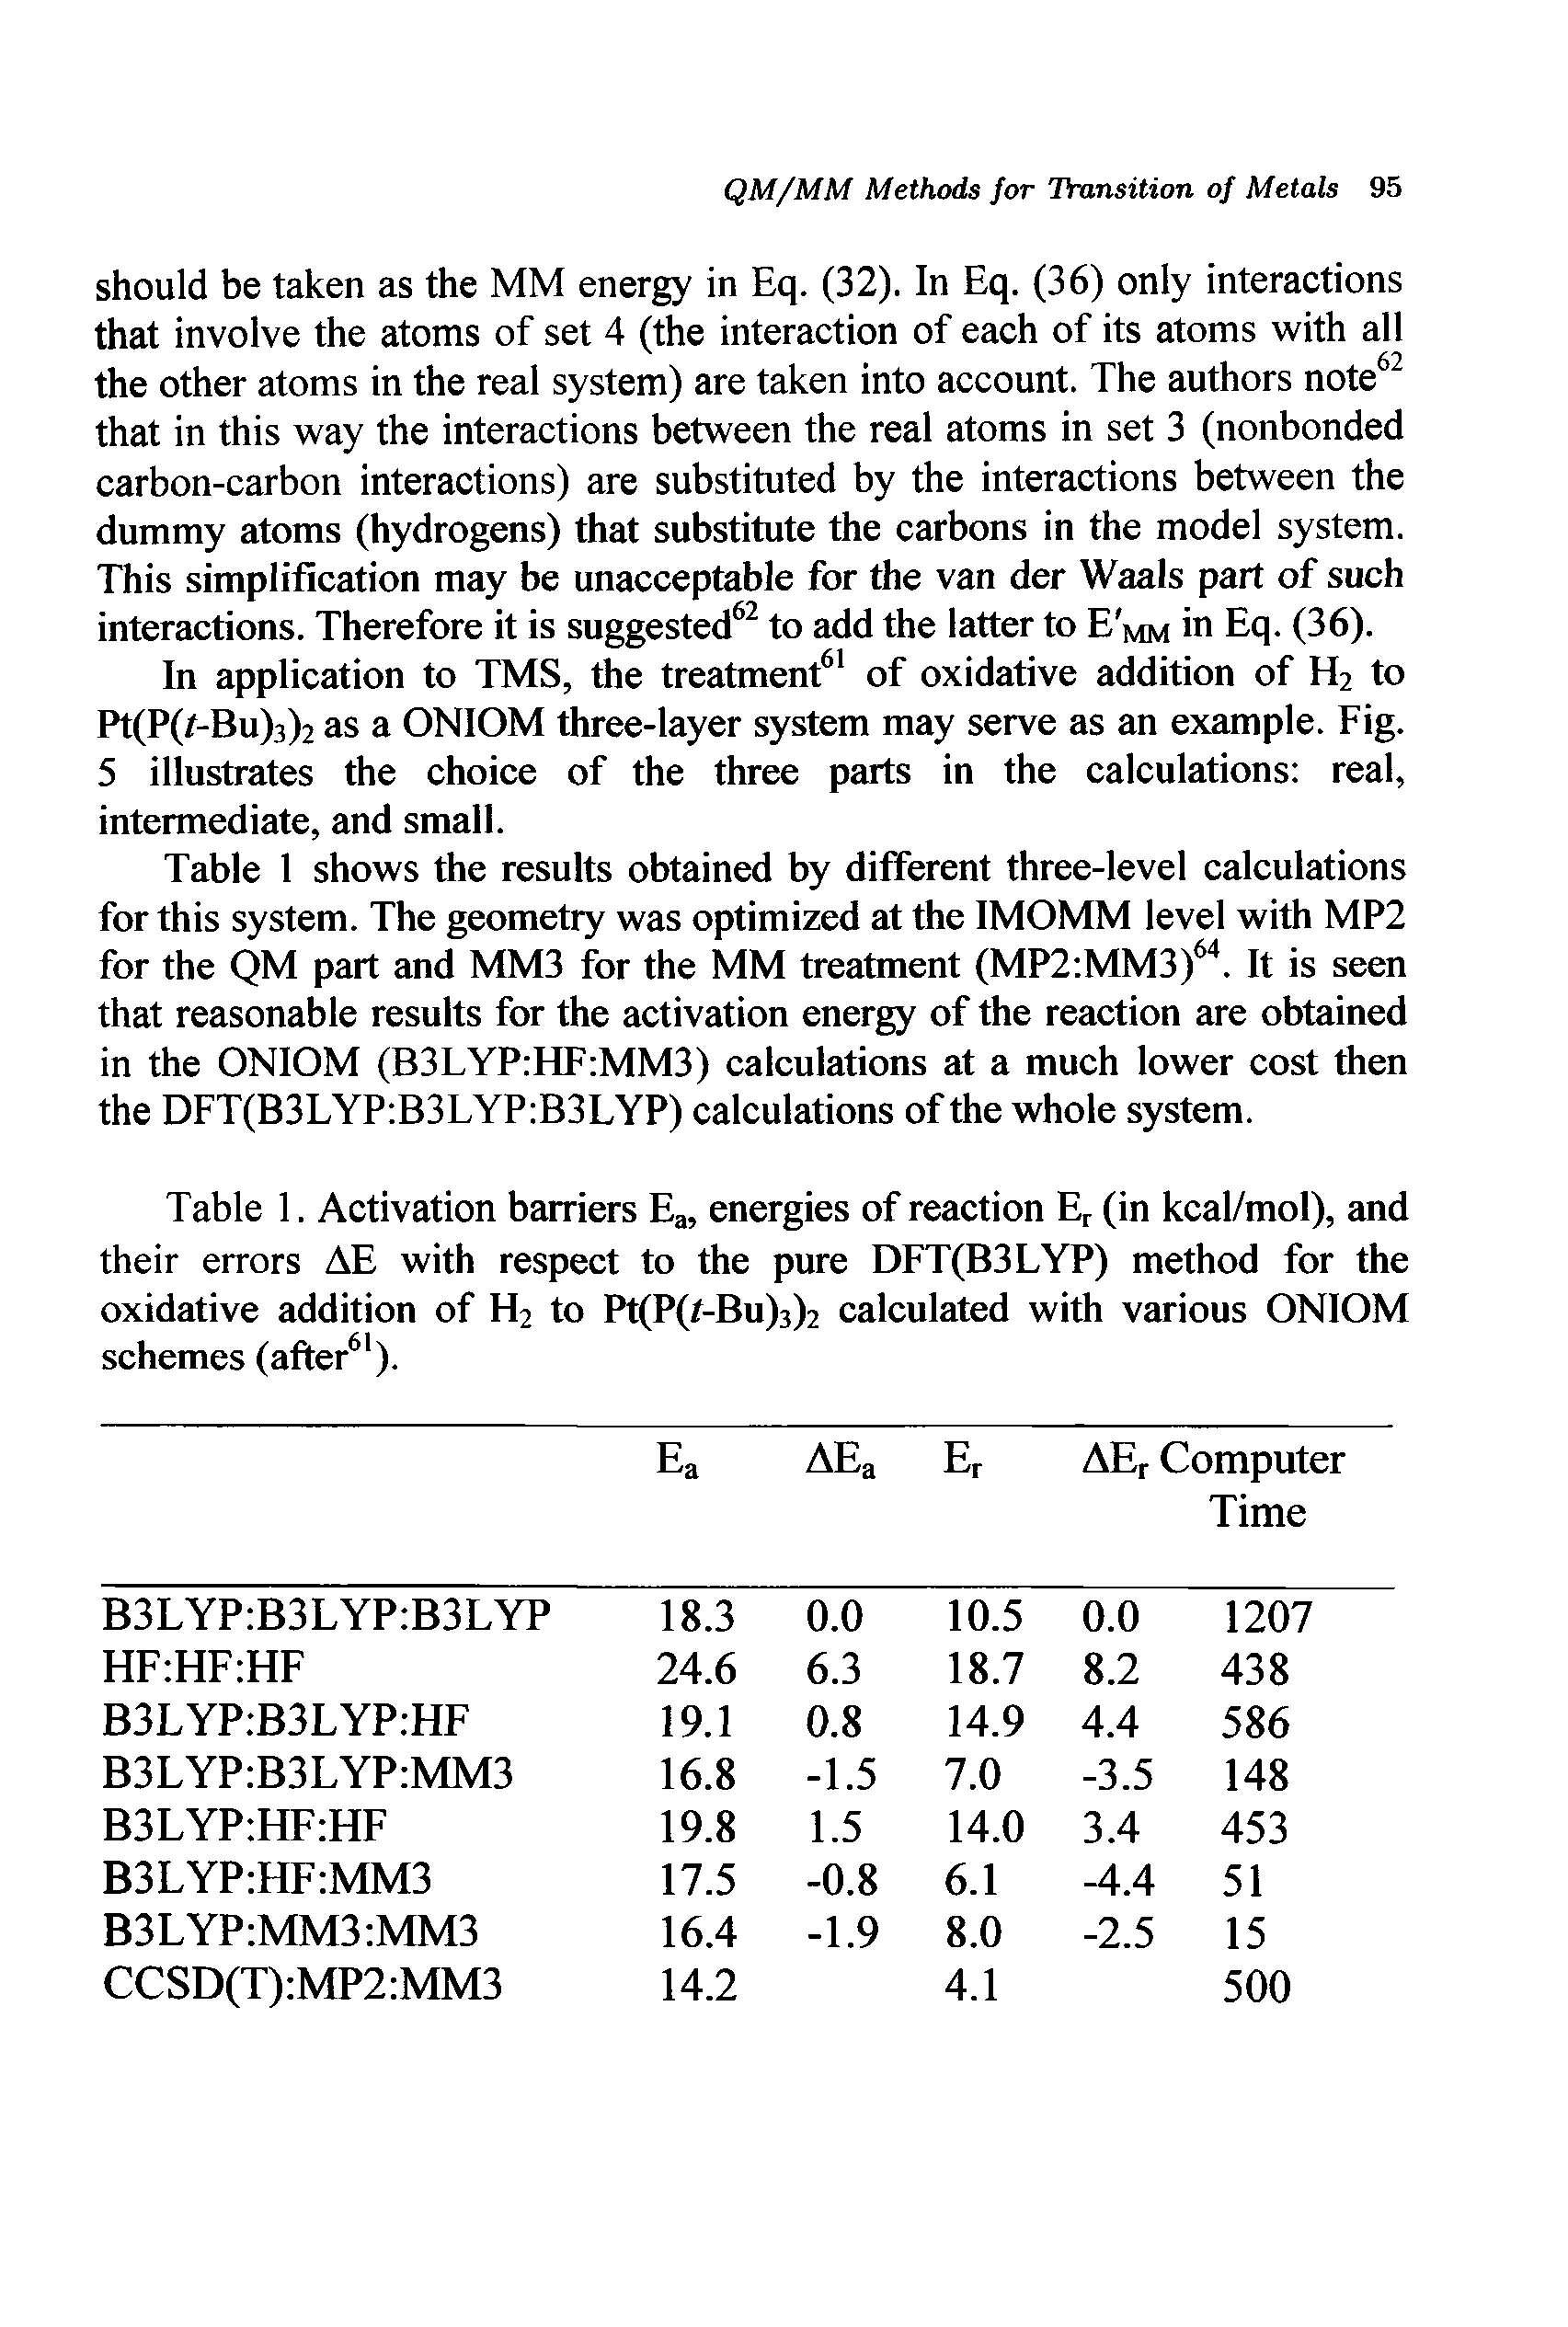 Table 1. Activation barriers Ea, energies of reaction Ej (in kcal/mol), and their errors AE with respect to the pure DFT(B3LYP) method for the oxidative addition of H2 to Pt(P(/-Bu)3)2 calculated with various ONIOM...